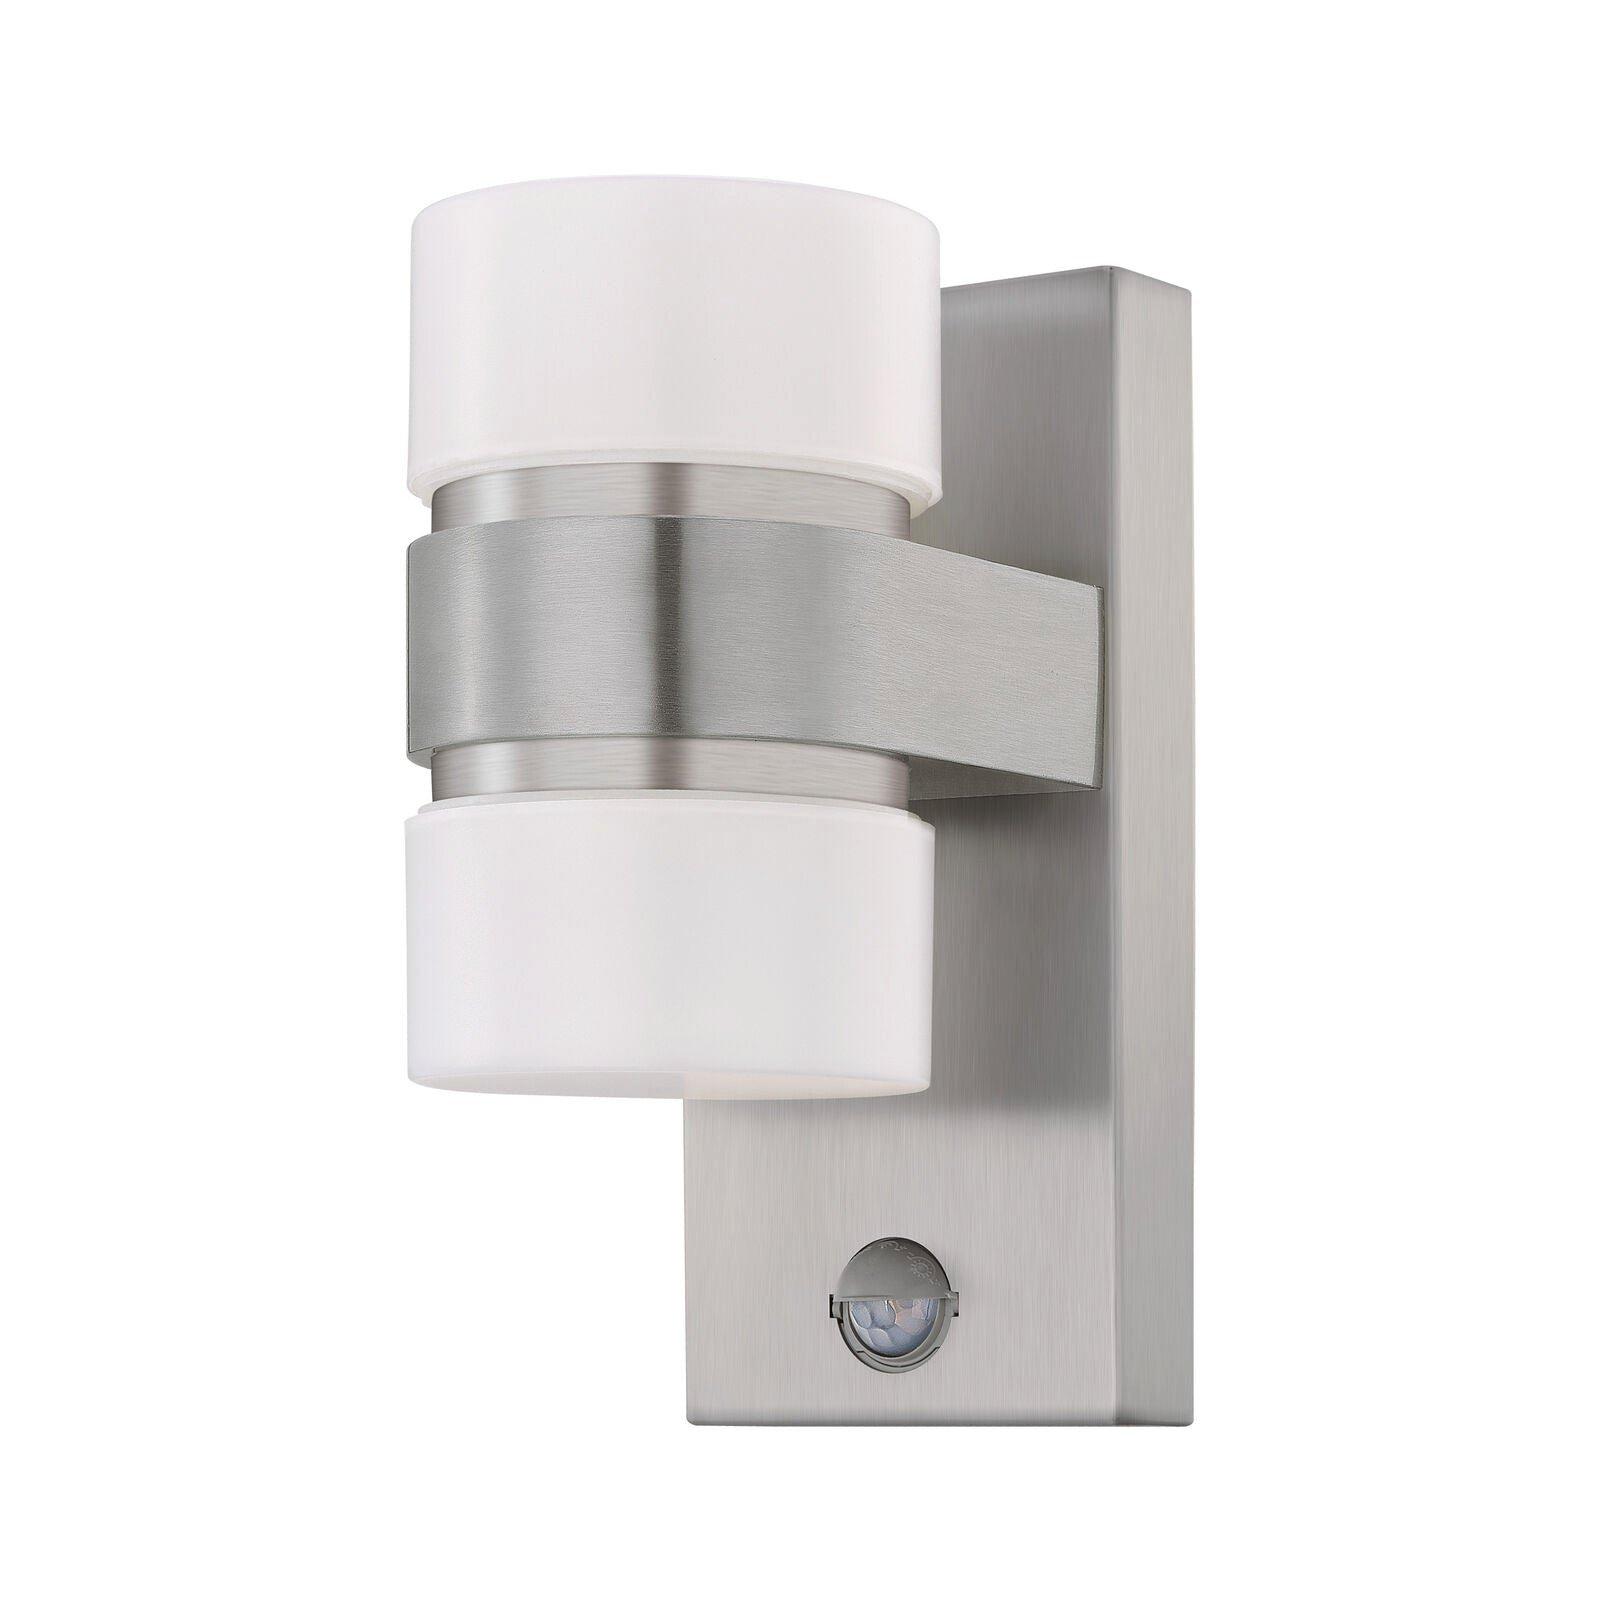 IP44 Outdoor Wall Light & PIR Sensor Stainless Steel & Silver 6W Built in LED